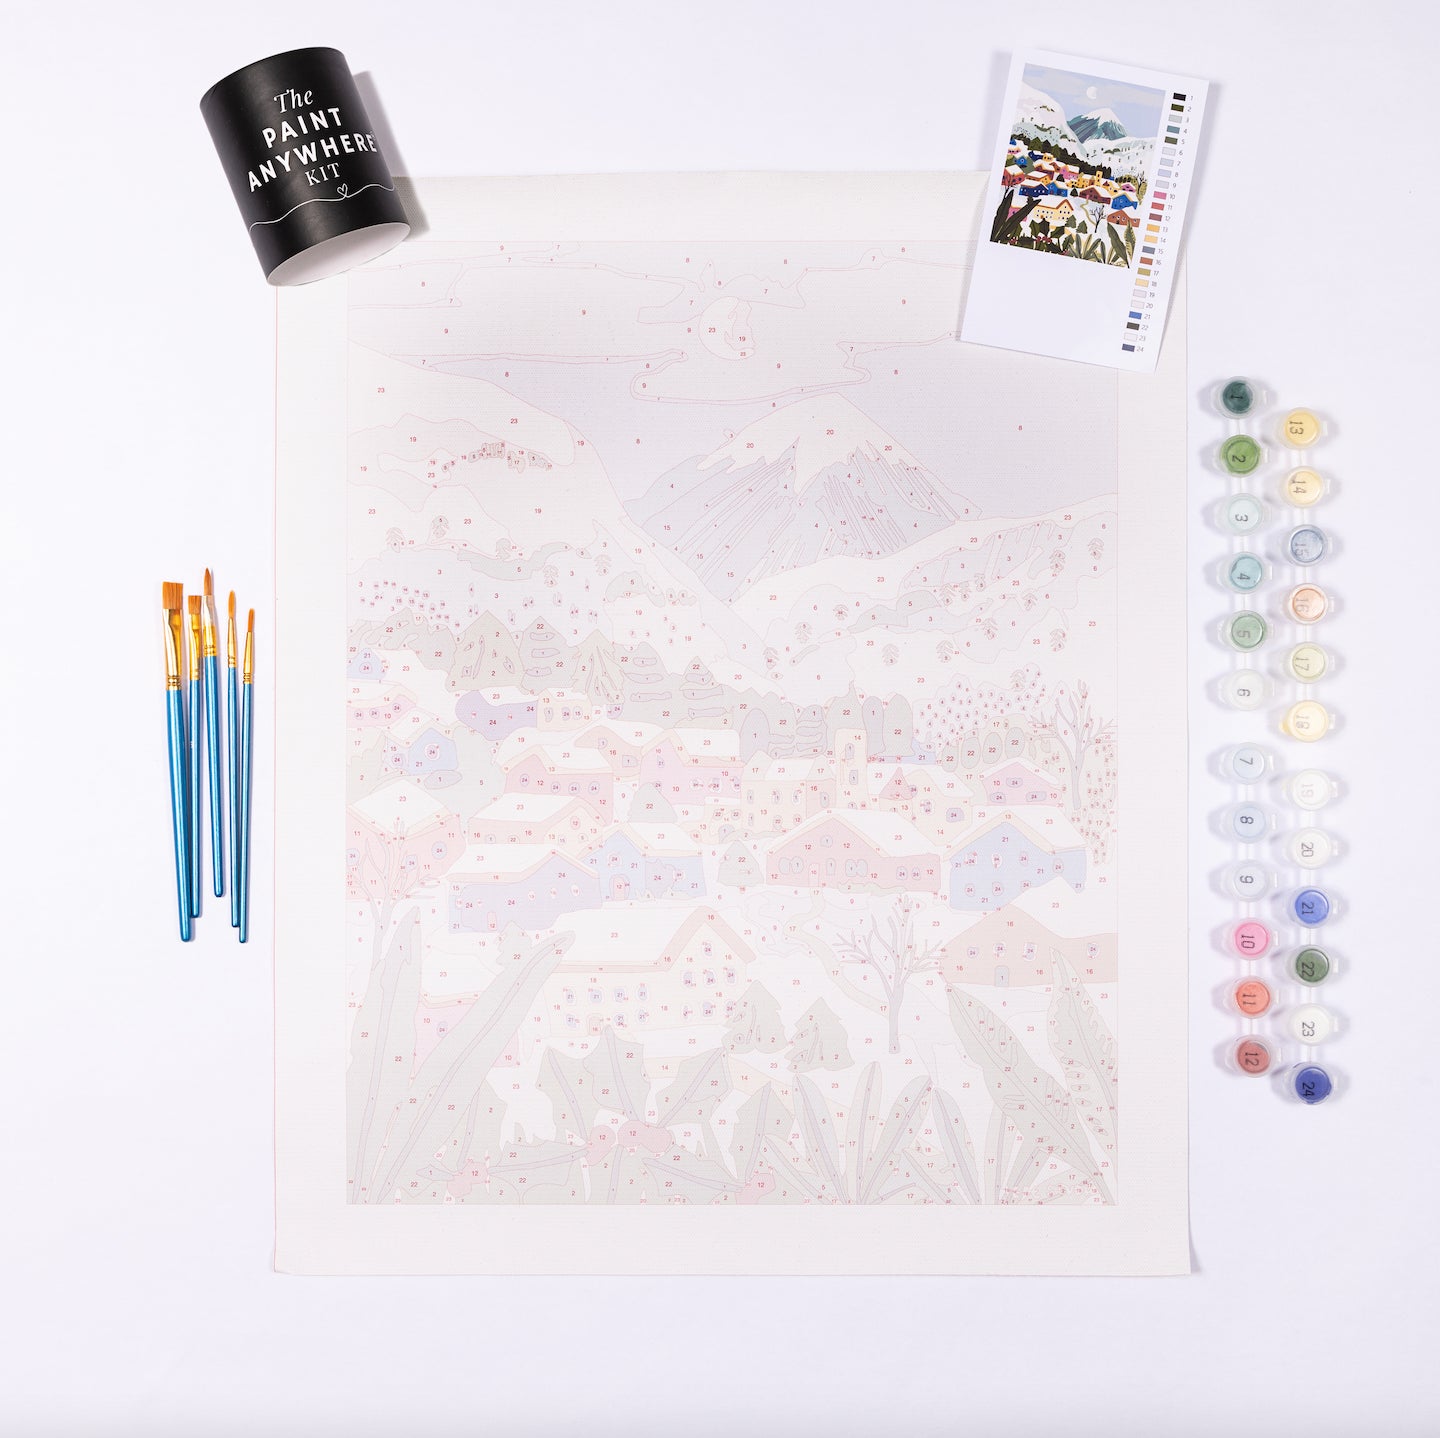 Snow Village Paint by Numbers Deluxe